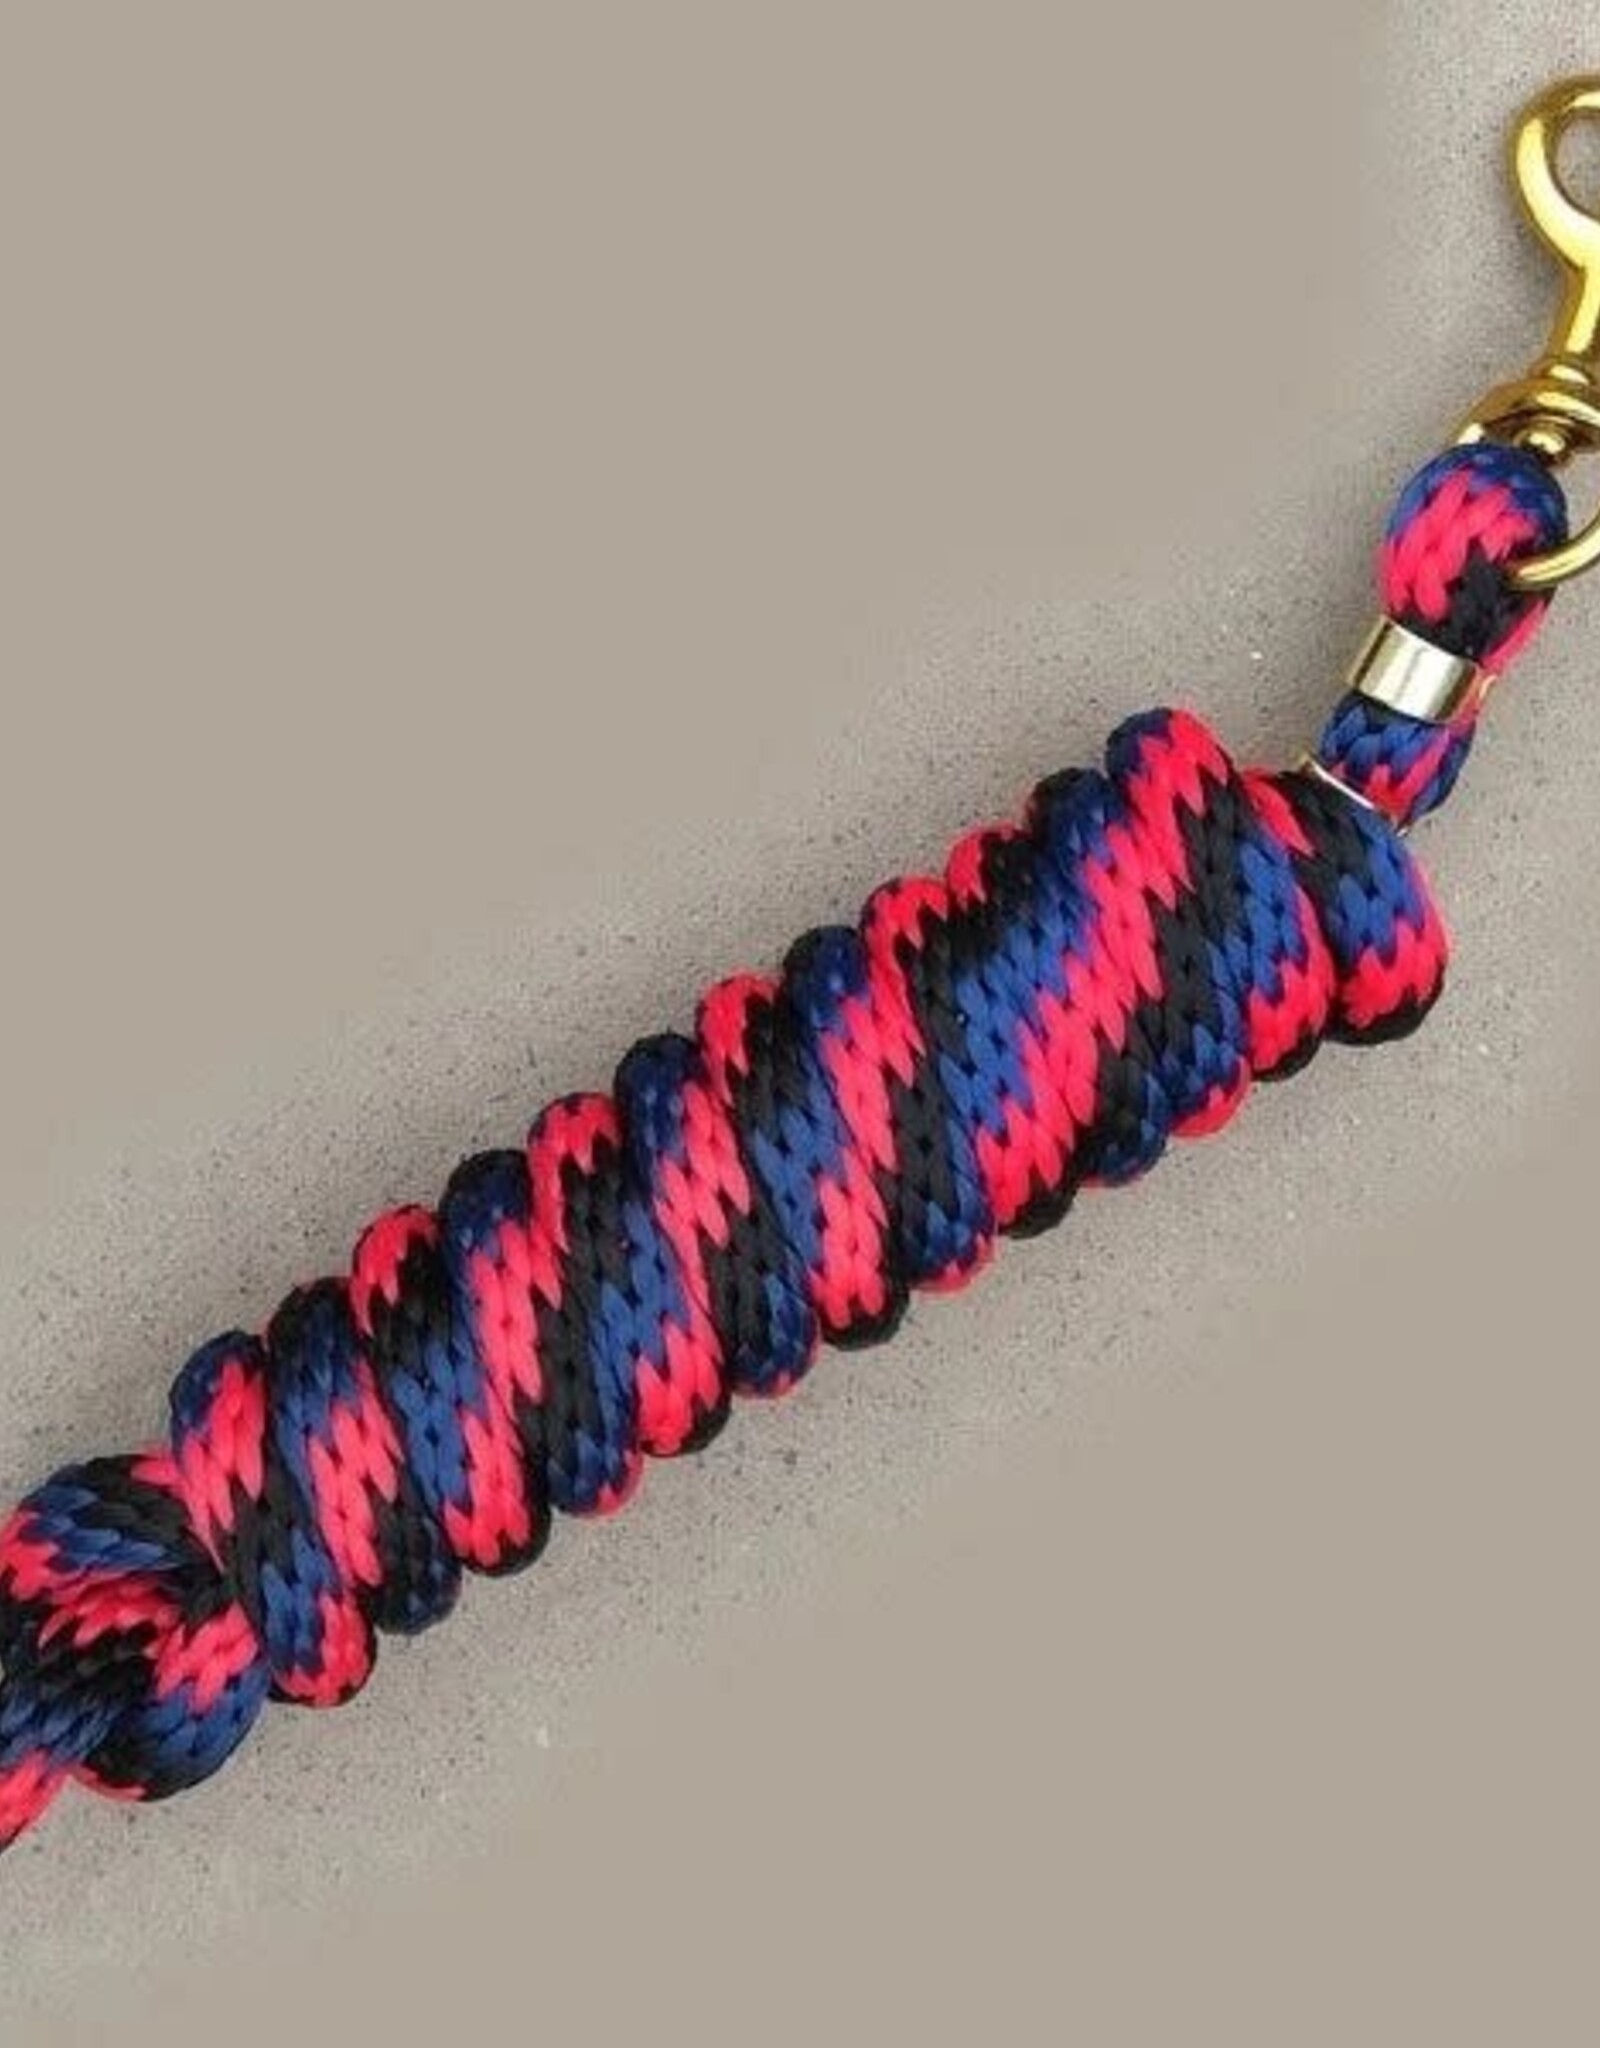 Epic Lead Rope 5/8' x 9"